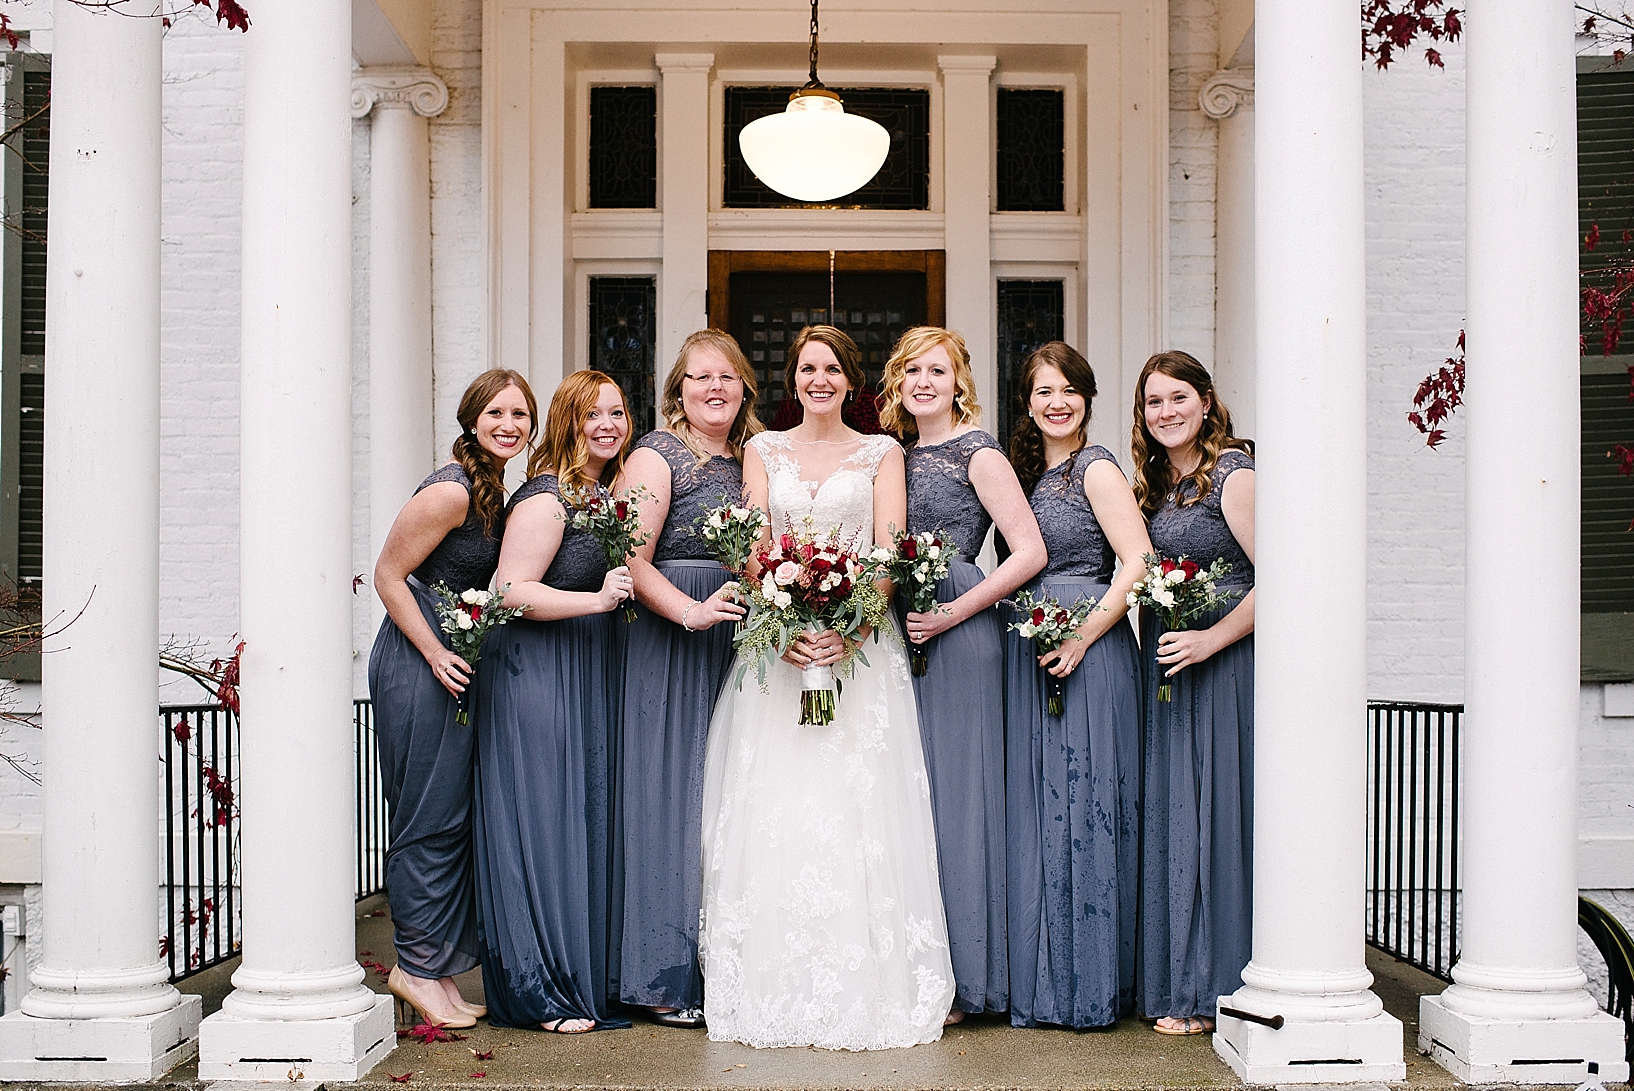 bride and bridesmaids in gray lace dresses standing on front porch of white home with tall pillars